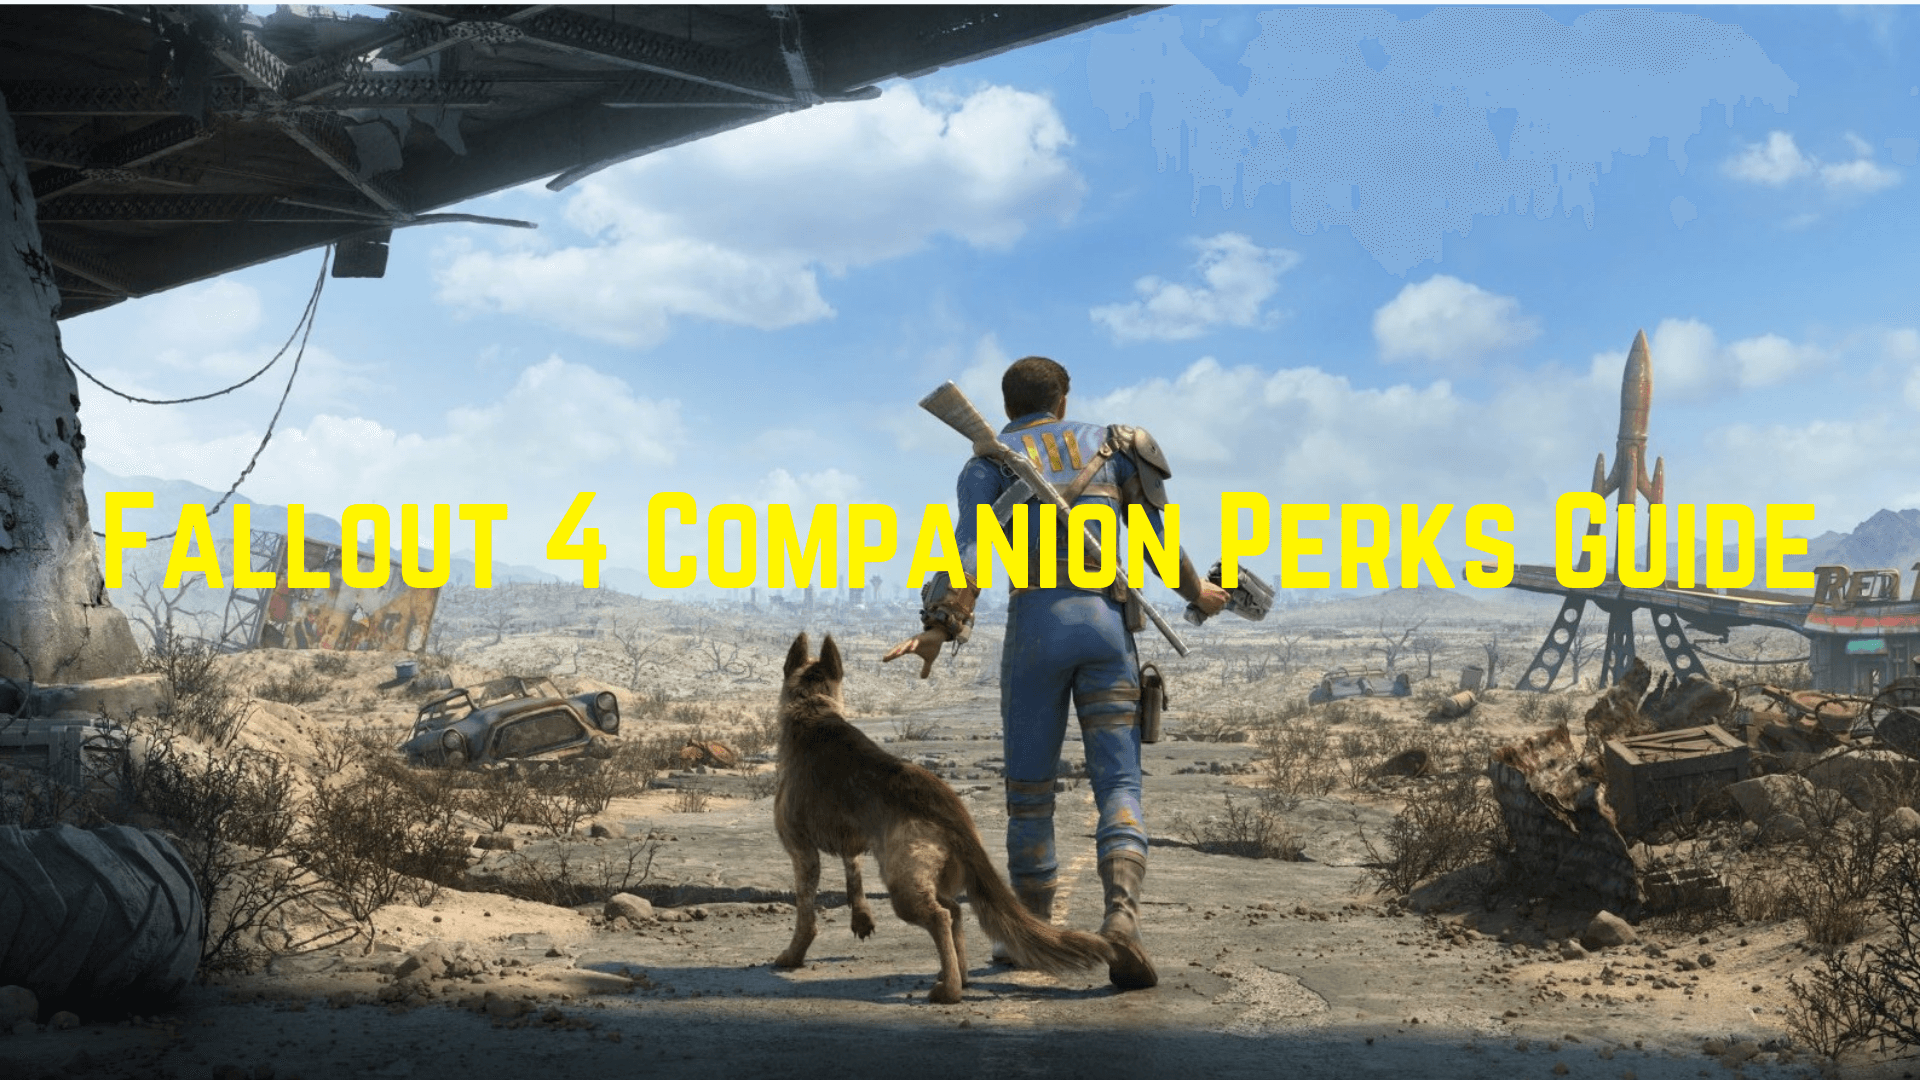 Fallout 4 Companion Perks Guide: The Complete List